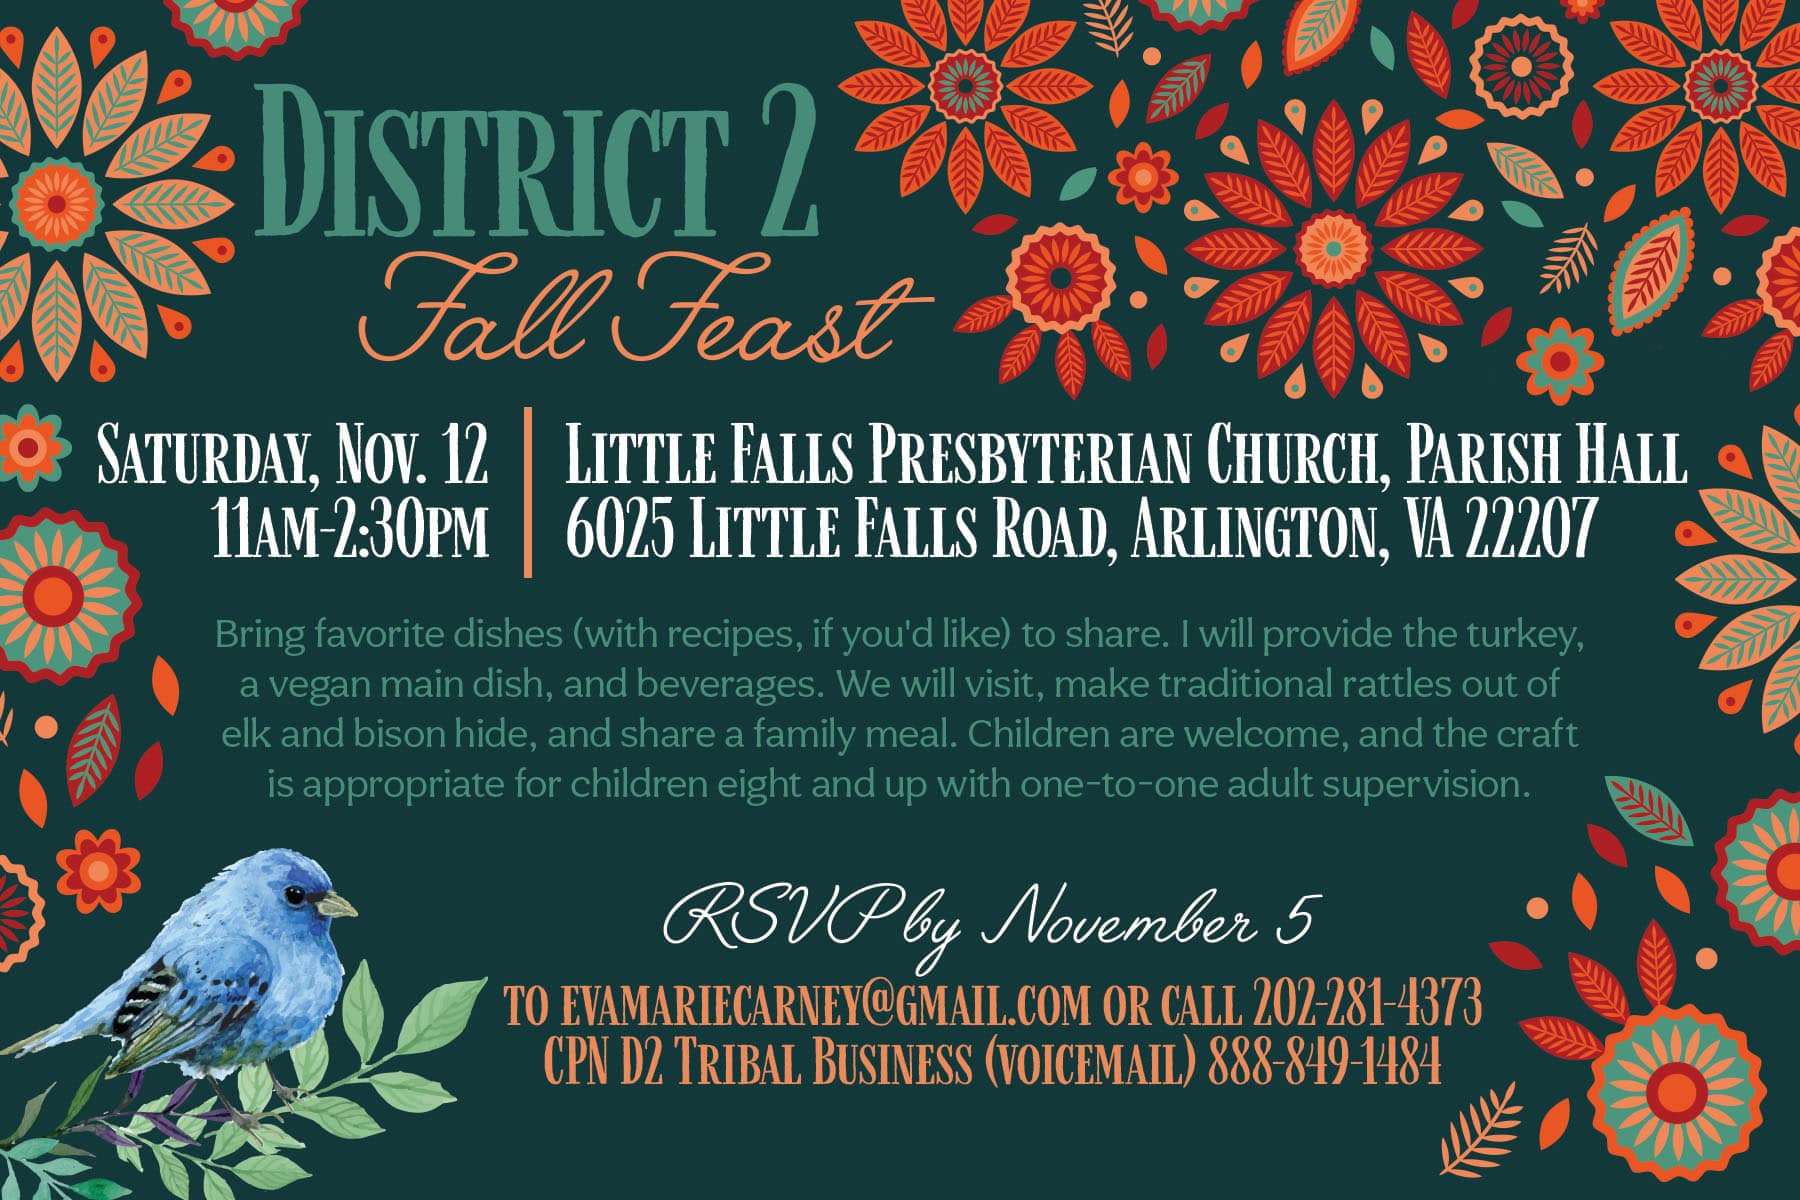 A teal postcard with bright red, orange, coral and teal floral designs and a bluebird invites CPN Tribal members to a District 2 Fall Feast on November 12, 2022.